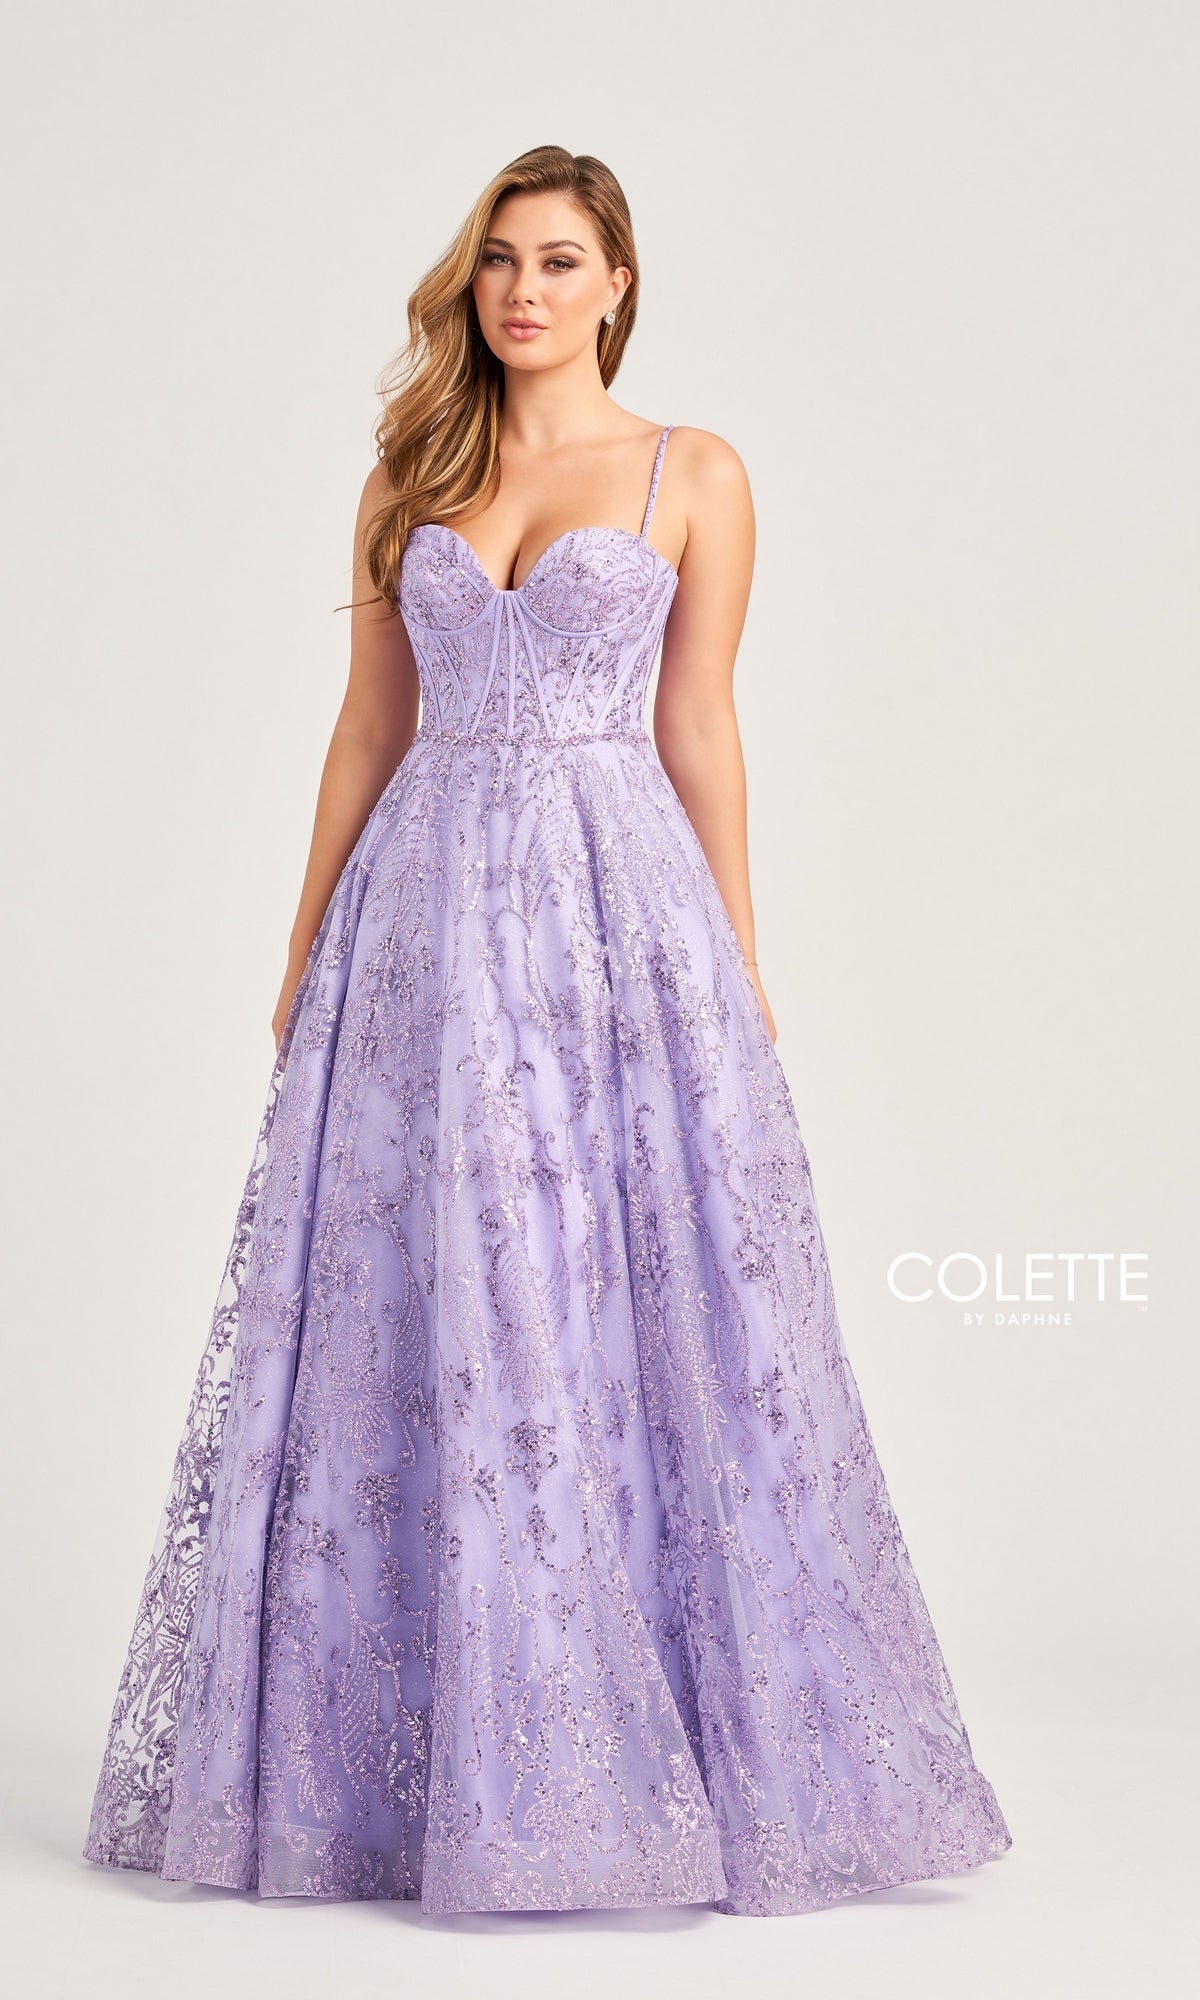 Colette Glitter-Tulle Long Prom Ball Gown CL5117